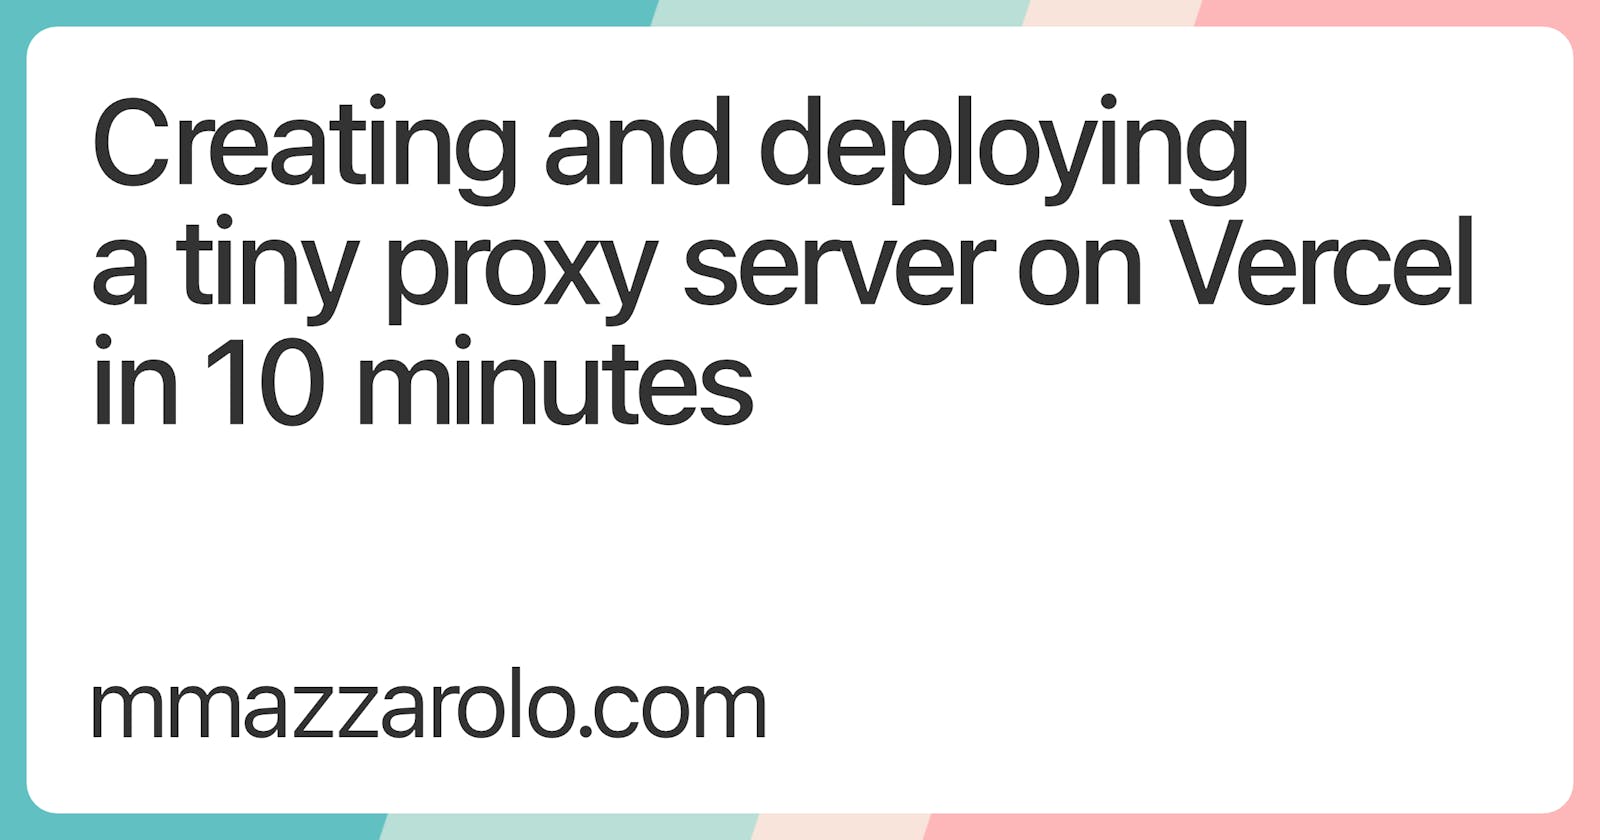 Creating and deploying a tiny proxy server on Vercel in 10 minutes